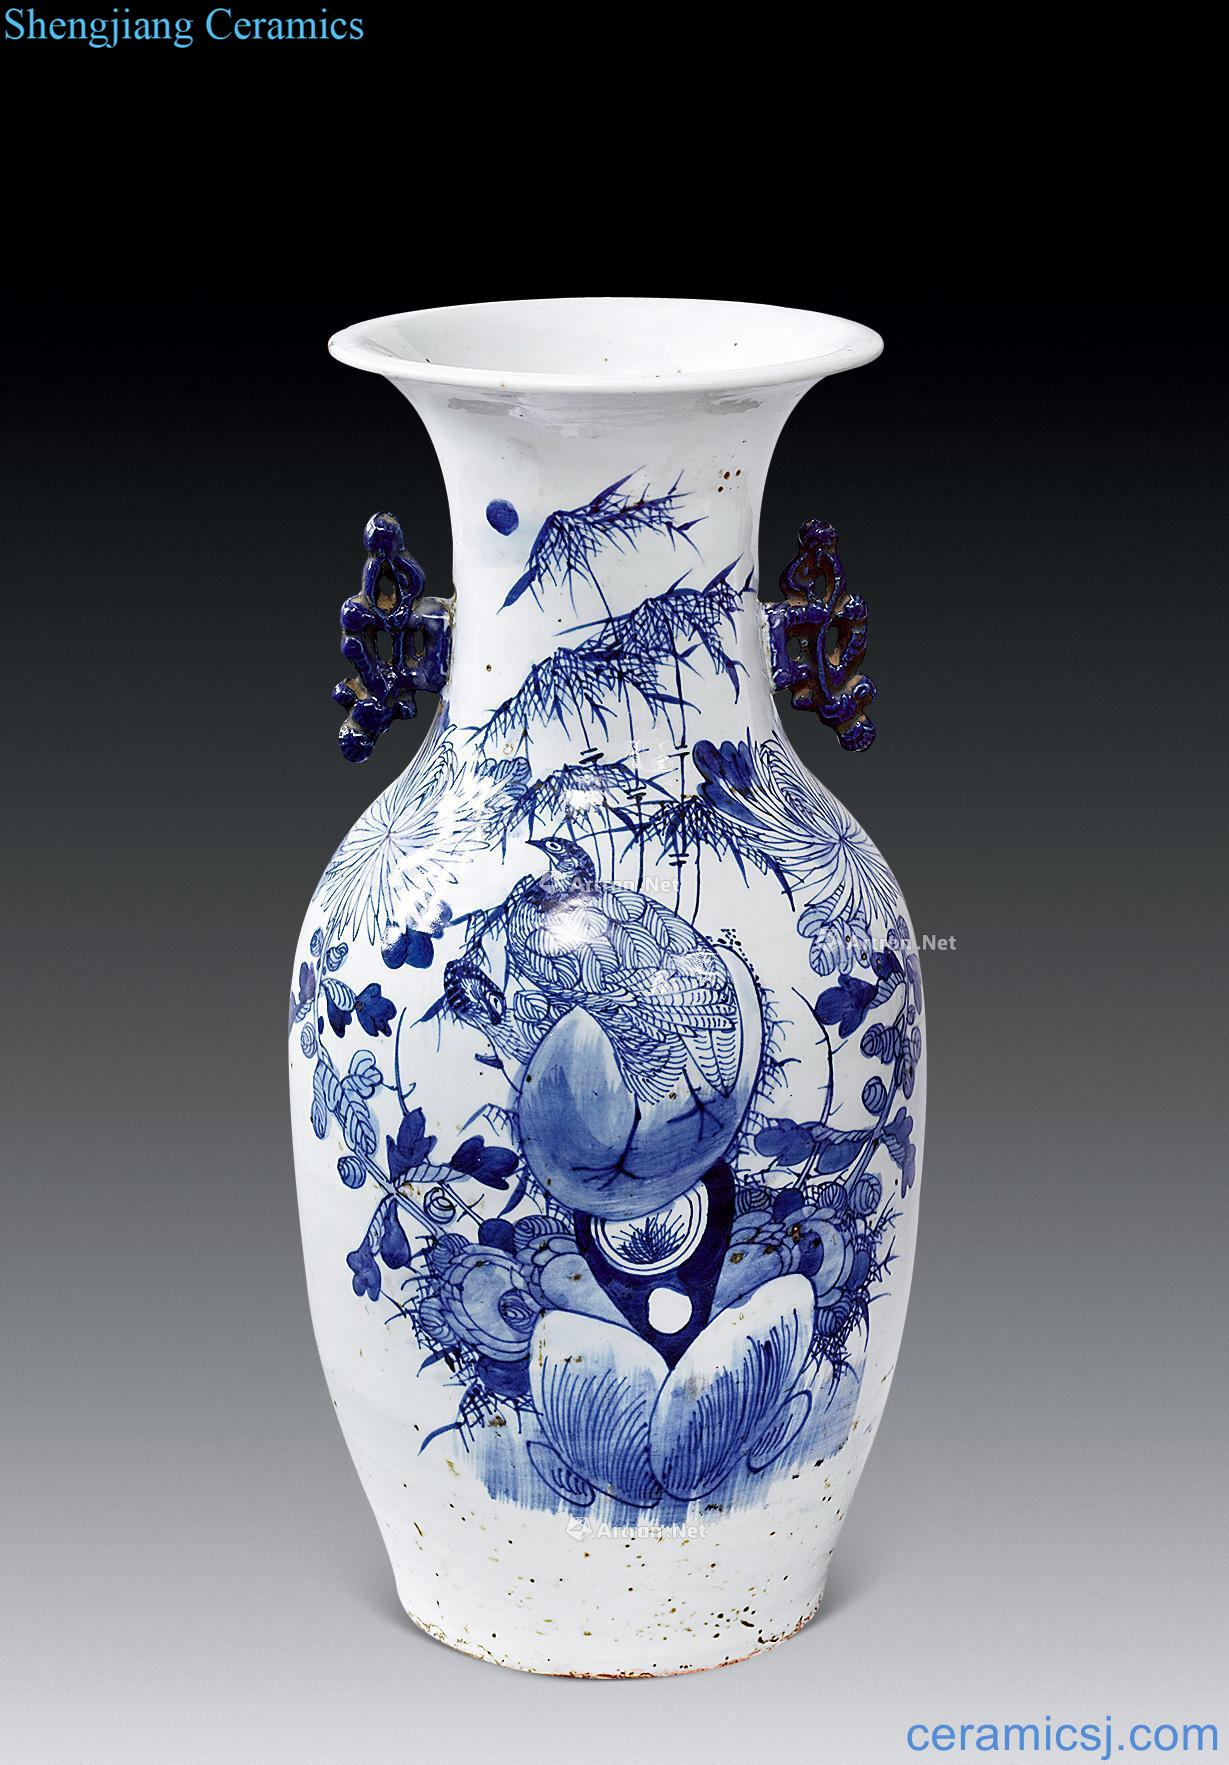 In the qing dynasty With the blue and white flowers and birds